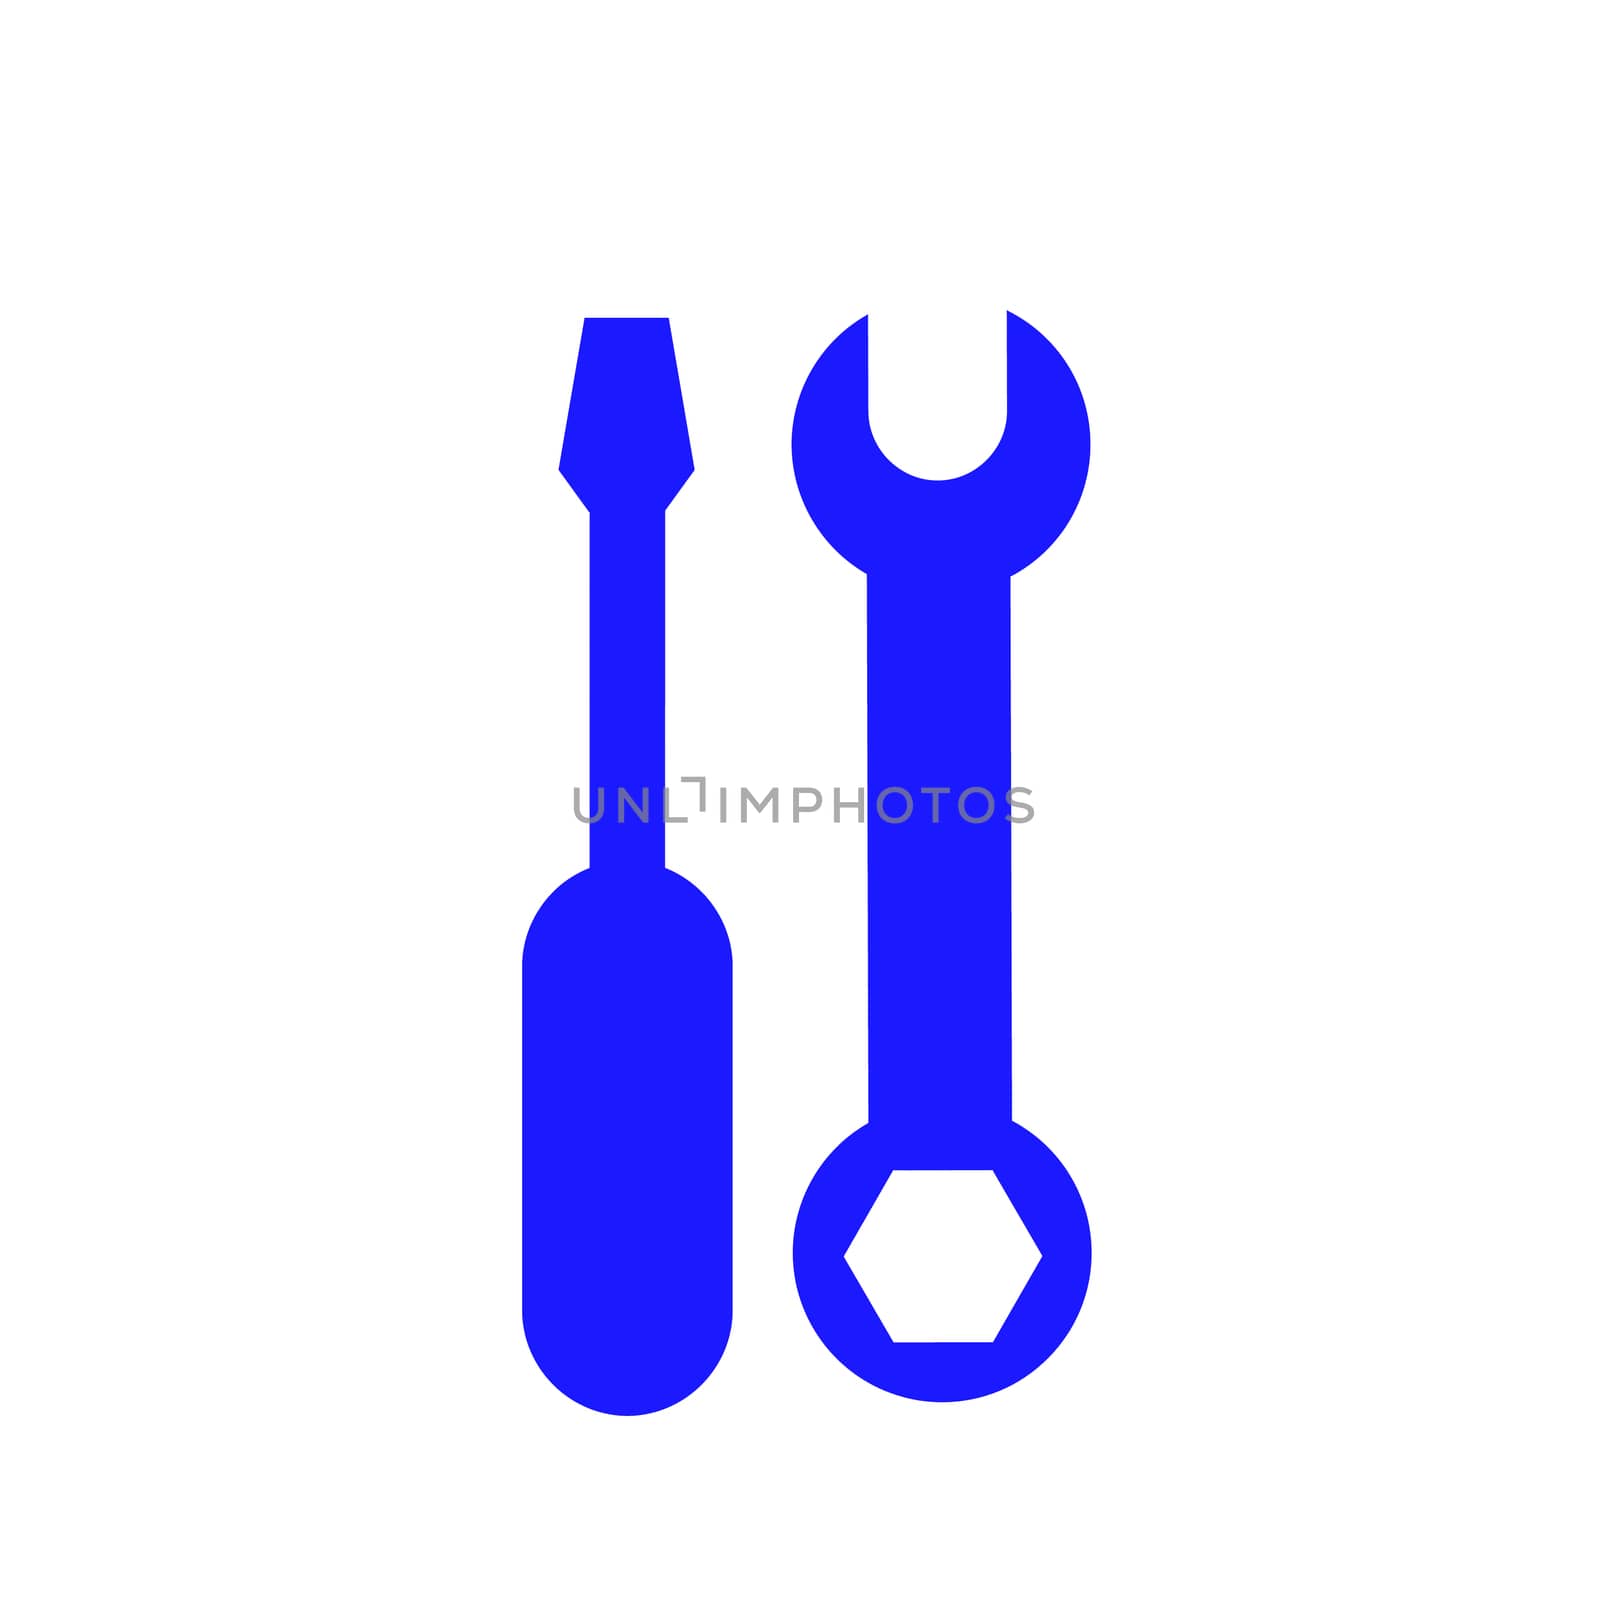 Wrench and screwdriver icon on white background.